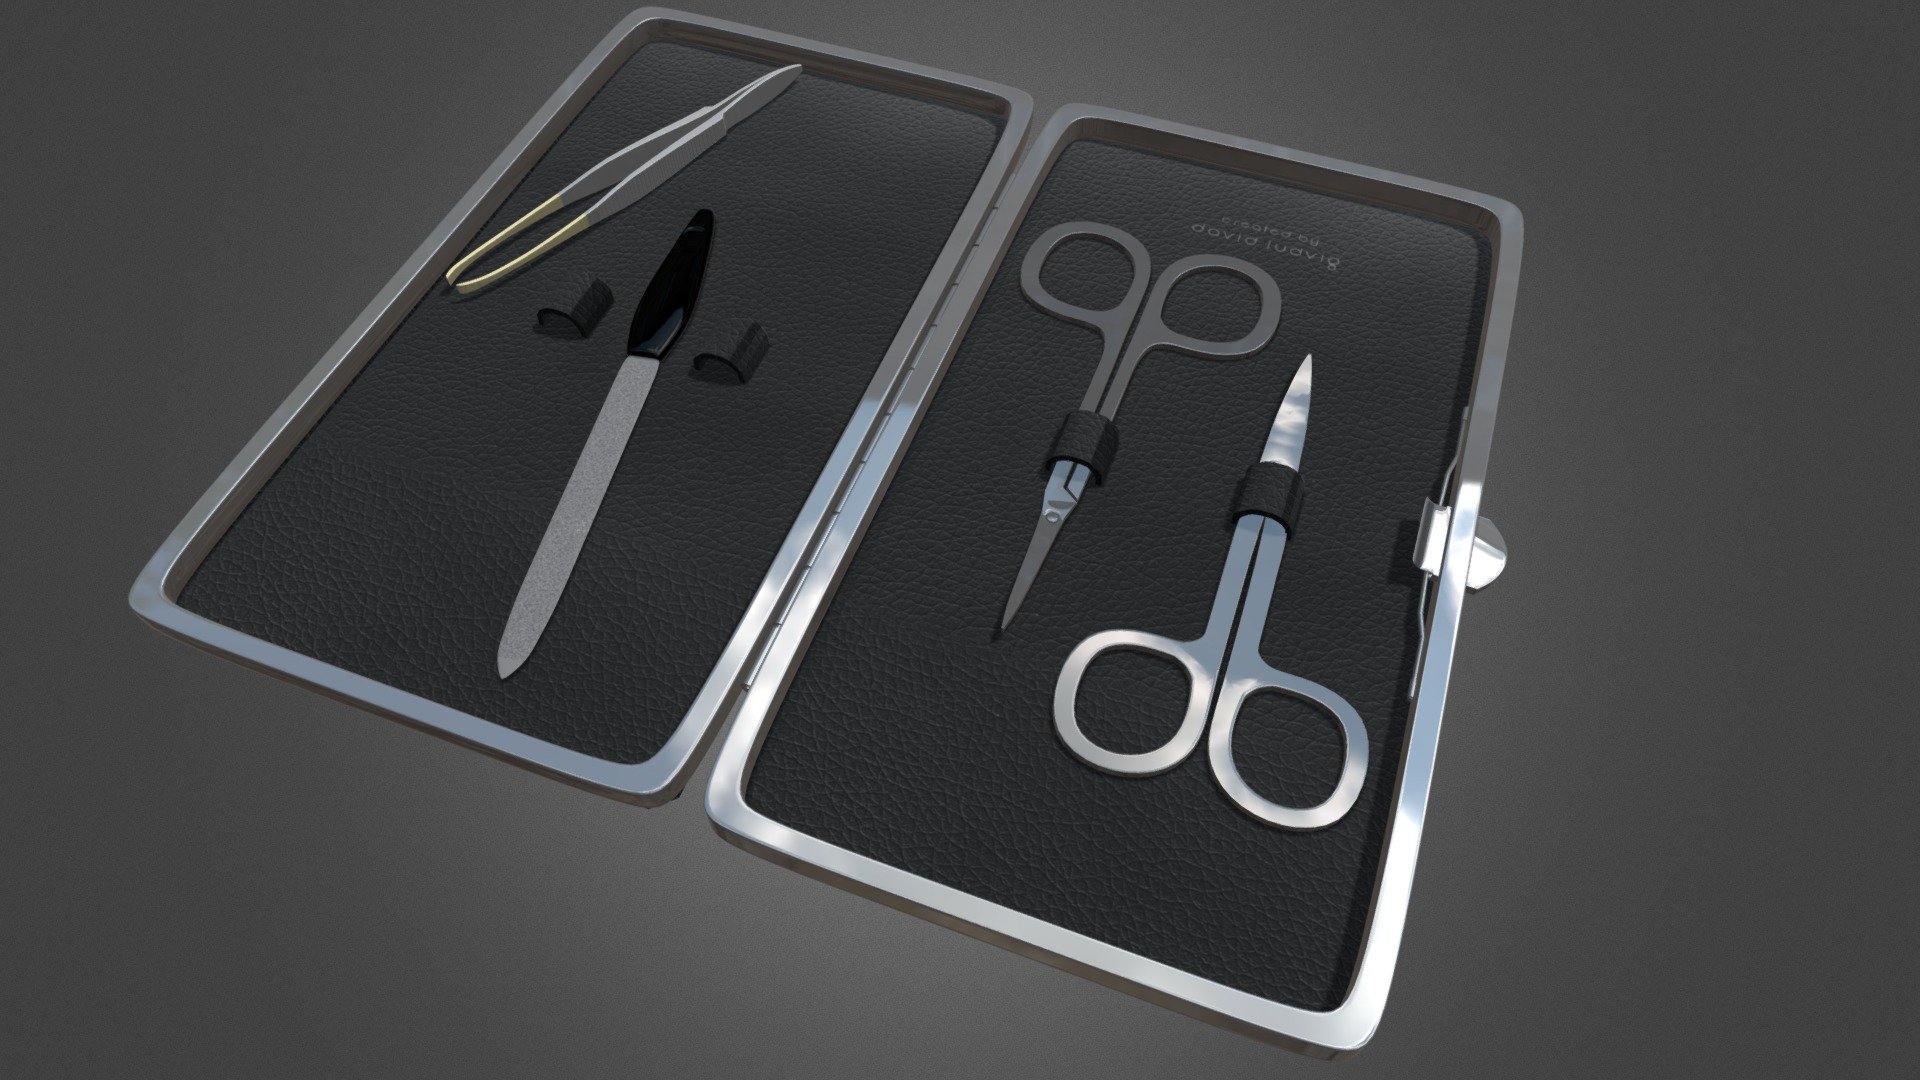 Selfmade manicure kit with black leather case.
Edit time: 5 days - Manicure Kit - 3D model by dgsamples 3d model